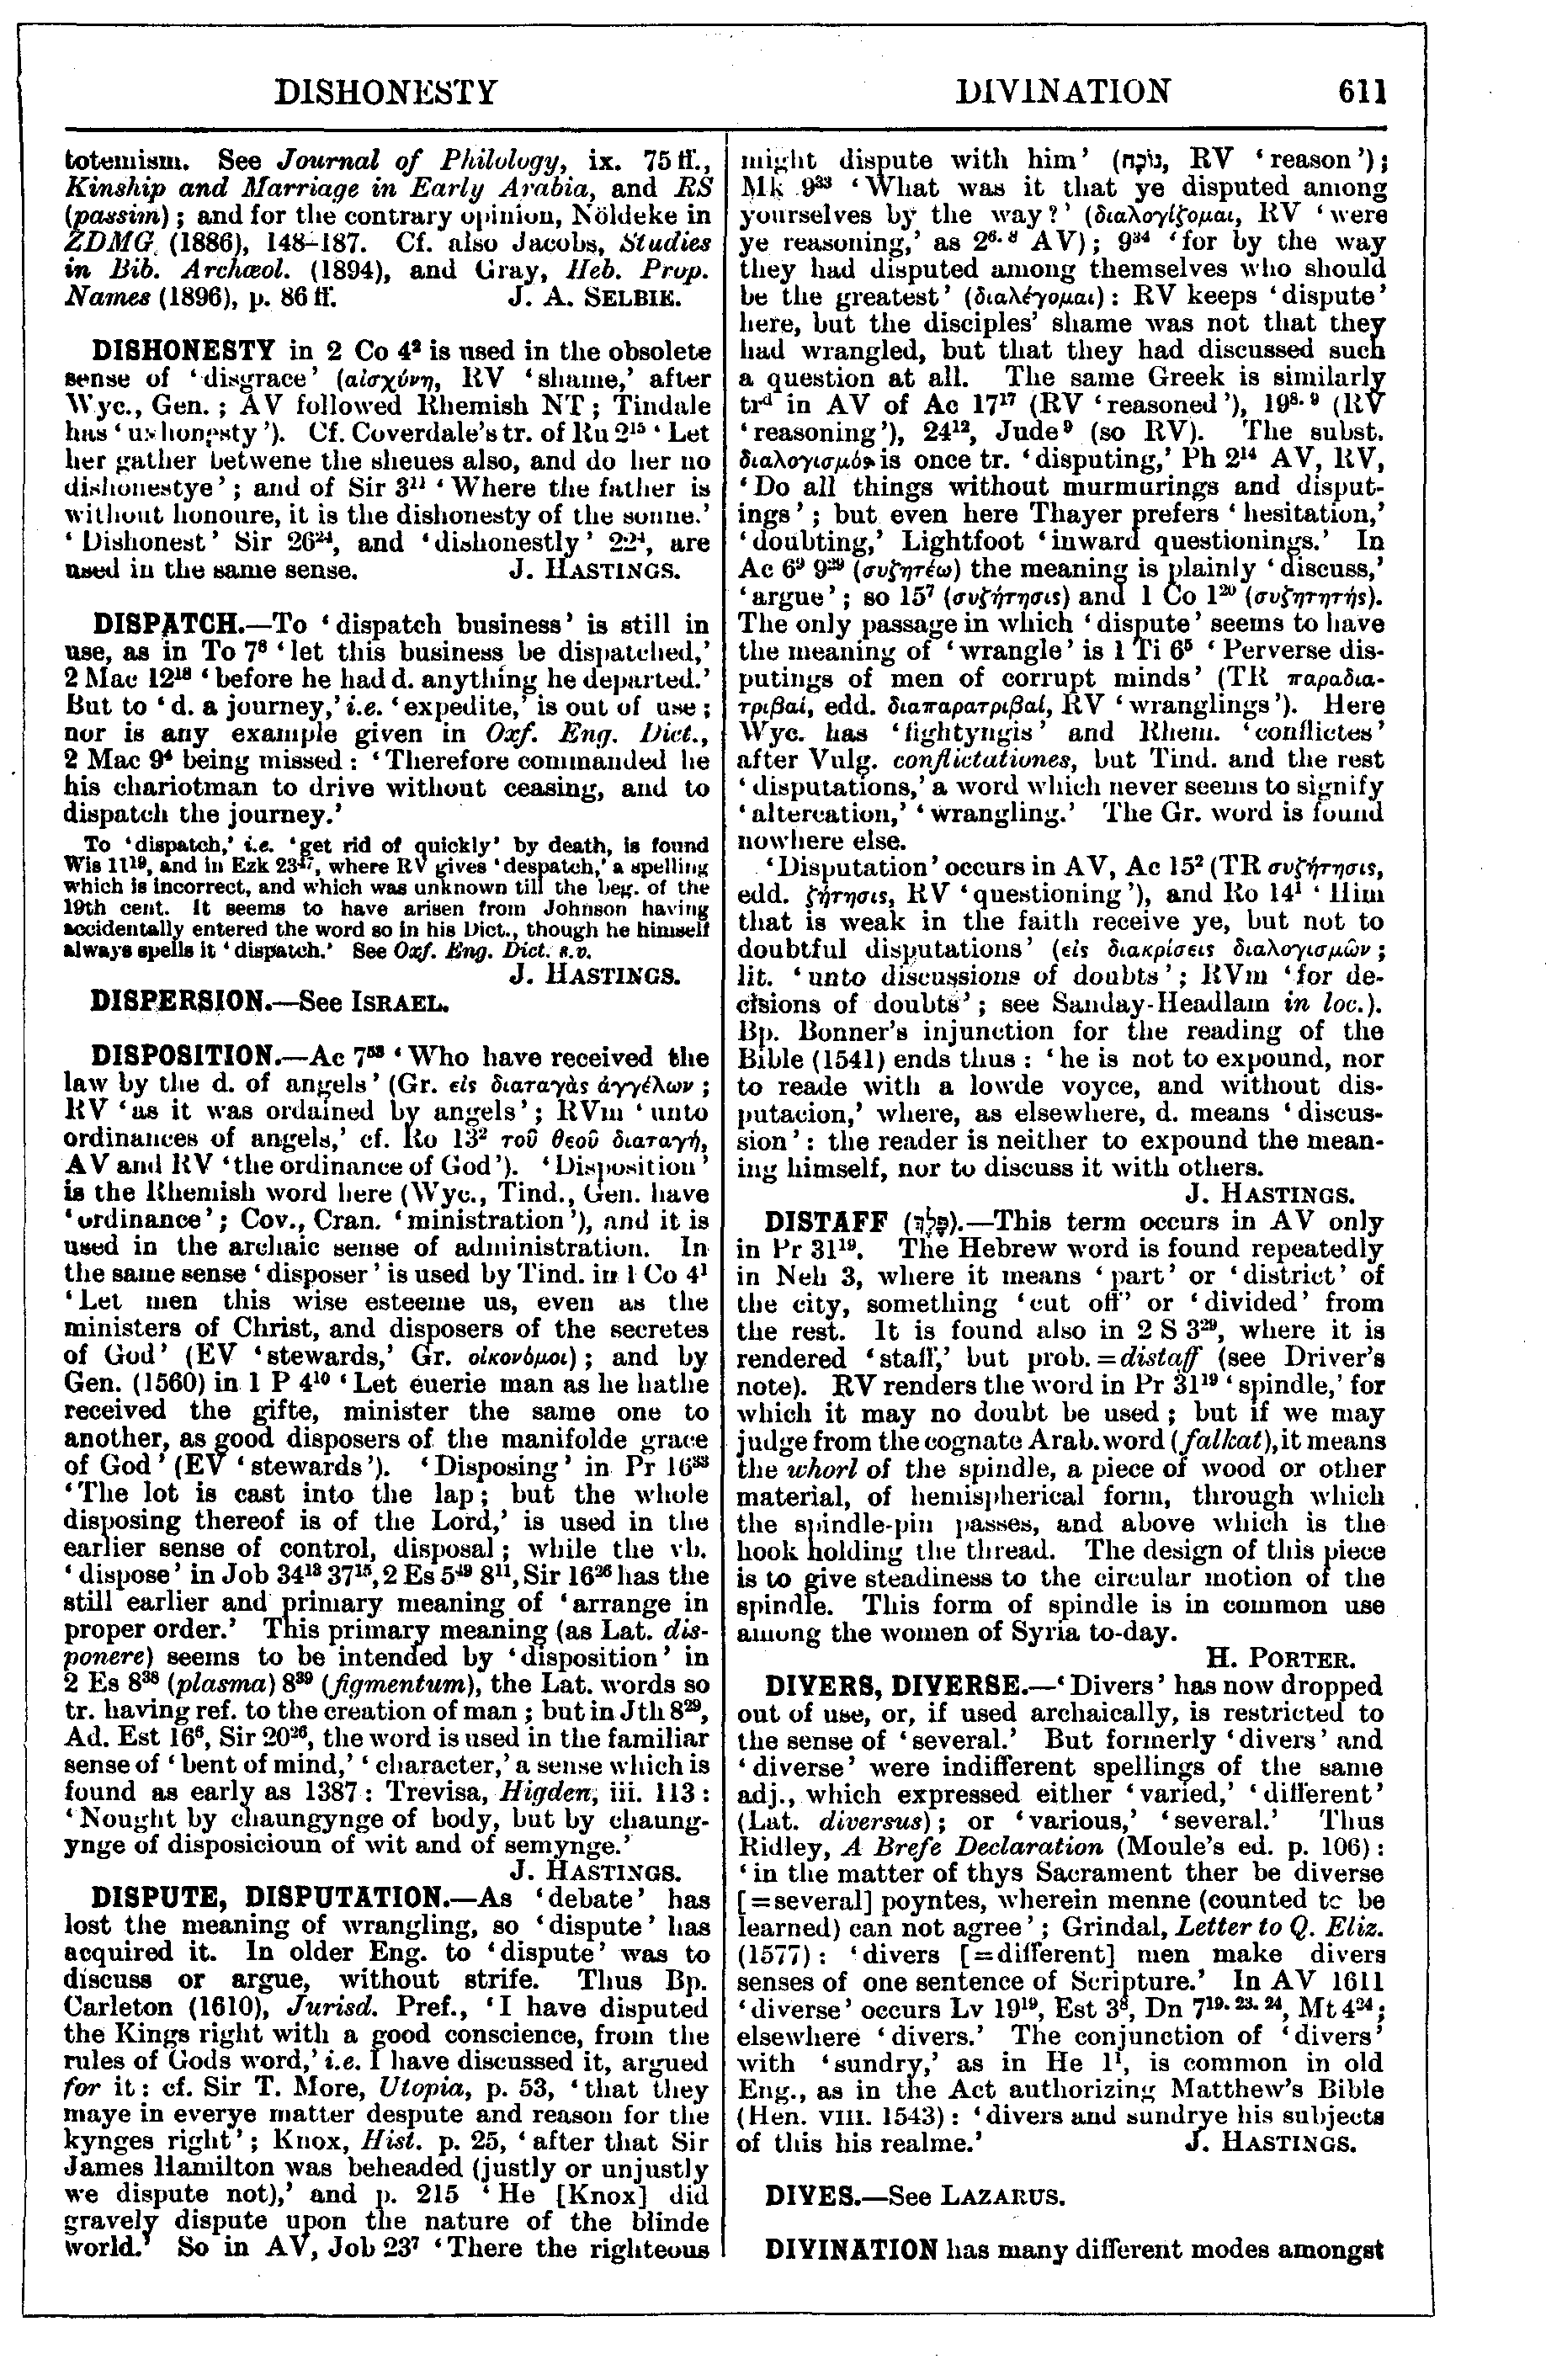 Image of page 611